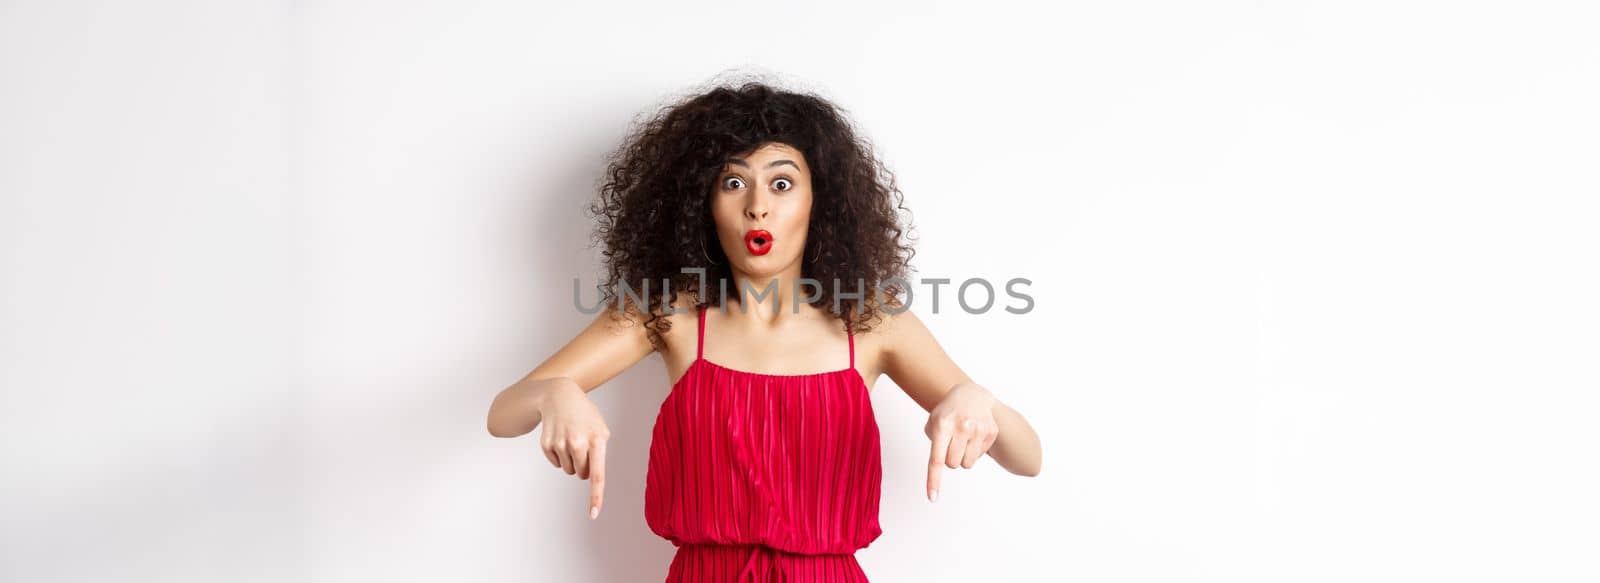 Impressed woman in red dress say wow, showing promo deal, pointing fingers down with amazed face, standing over white background.